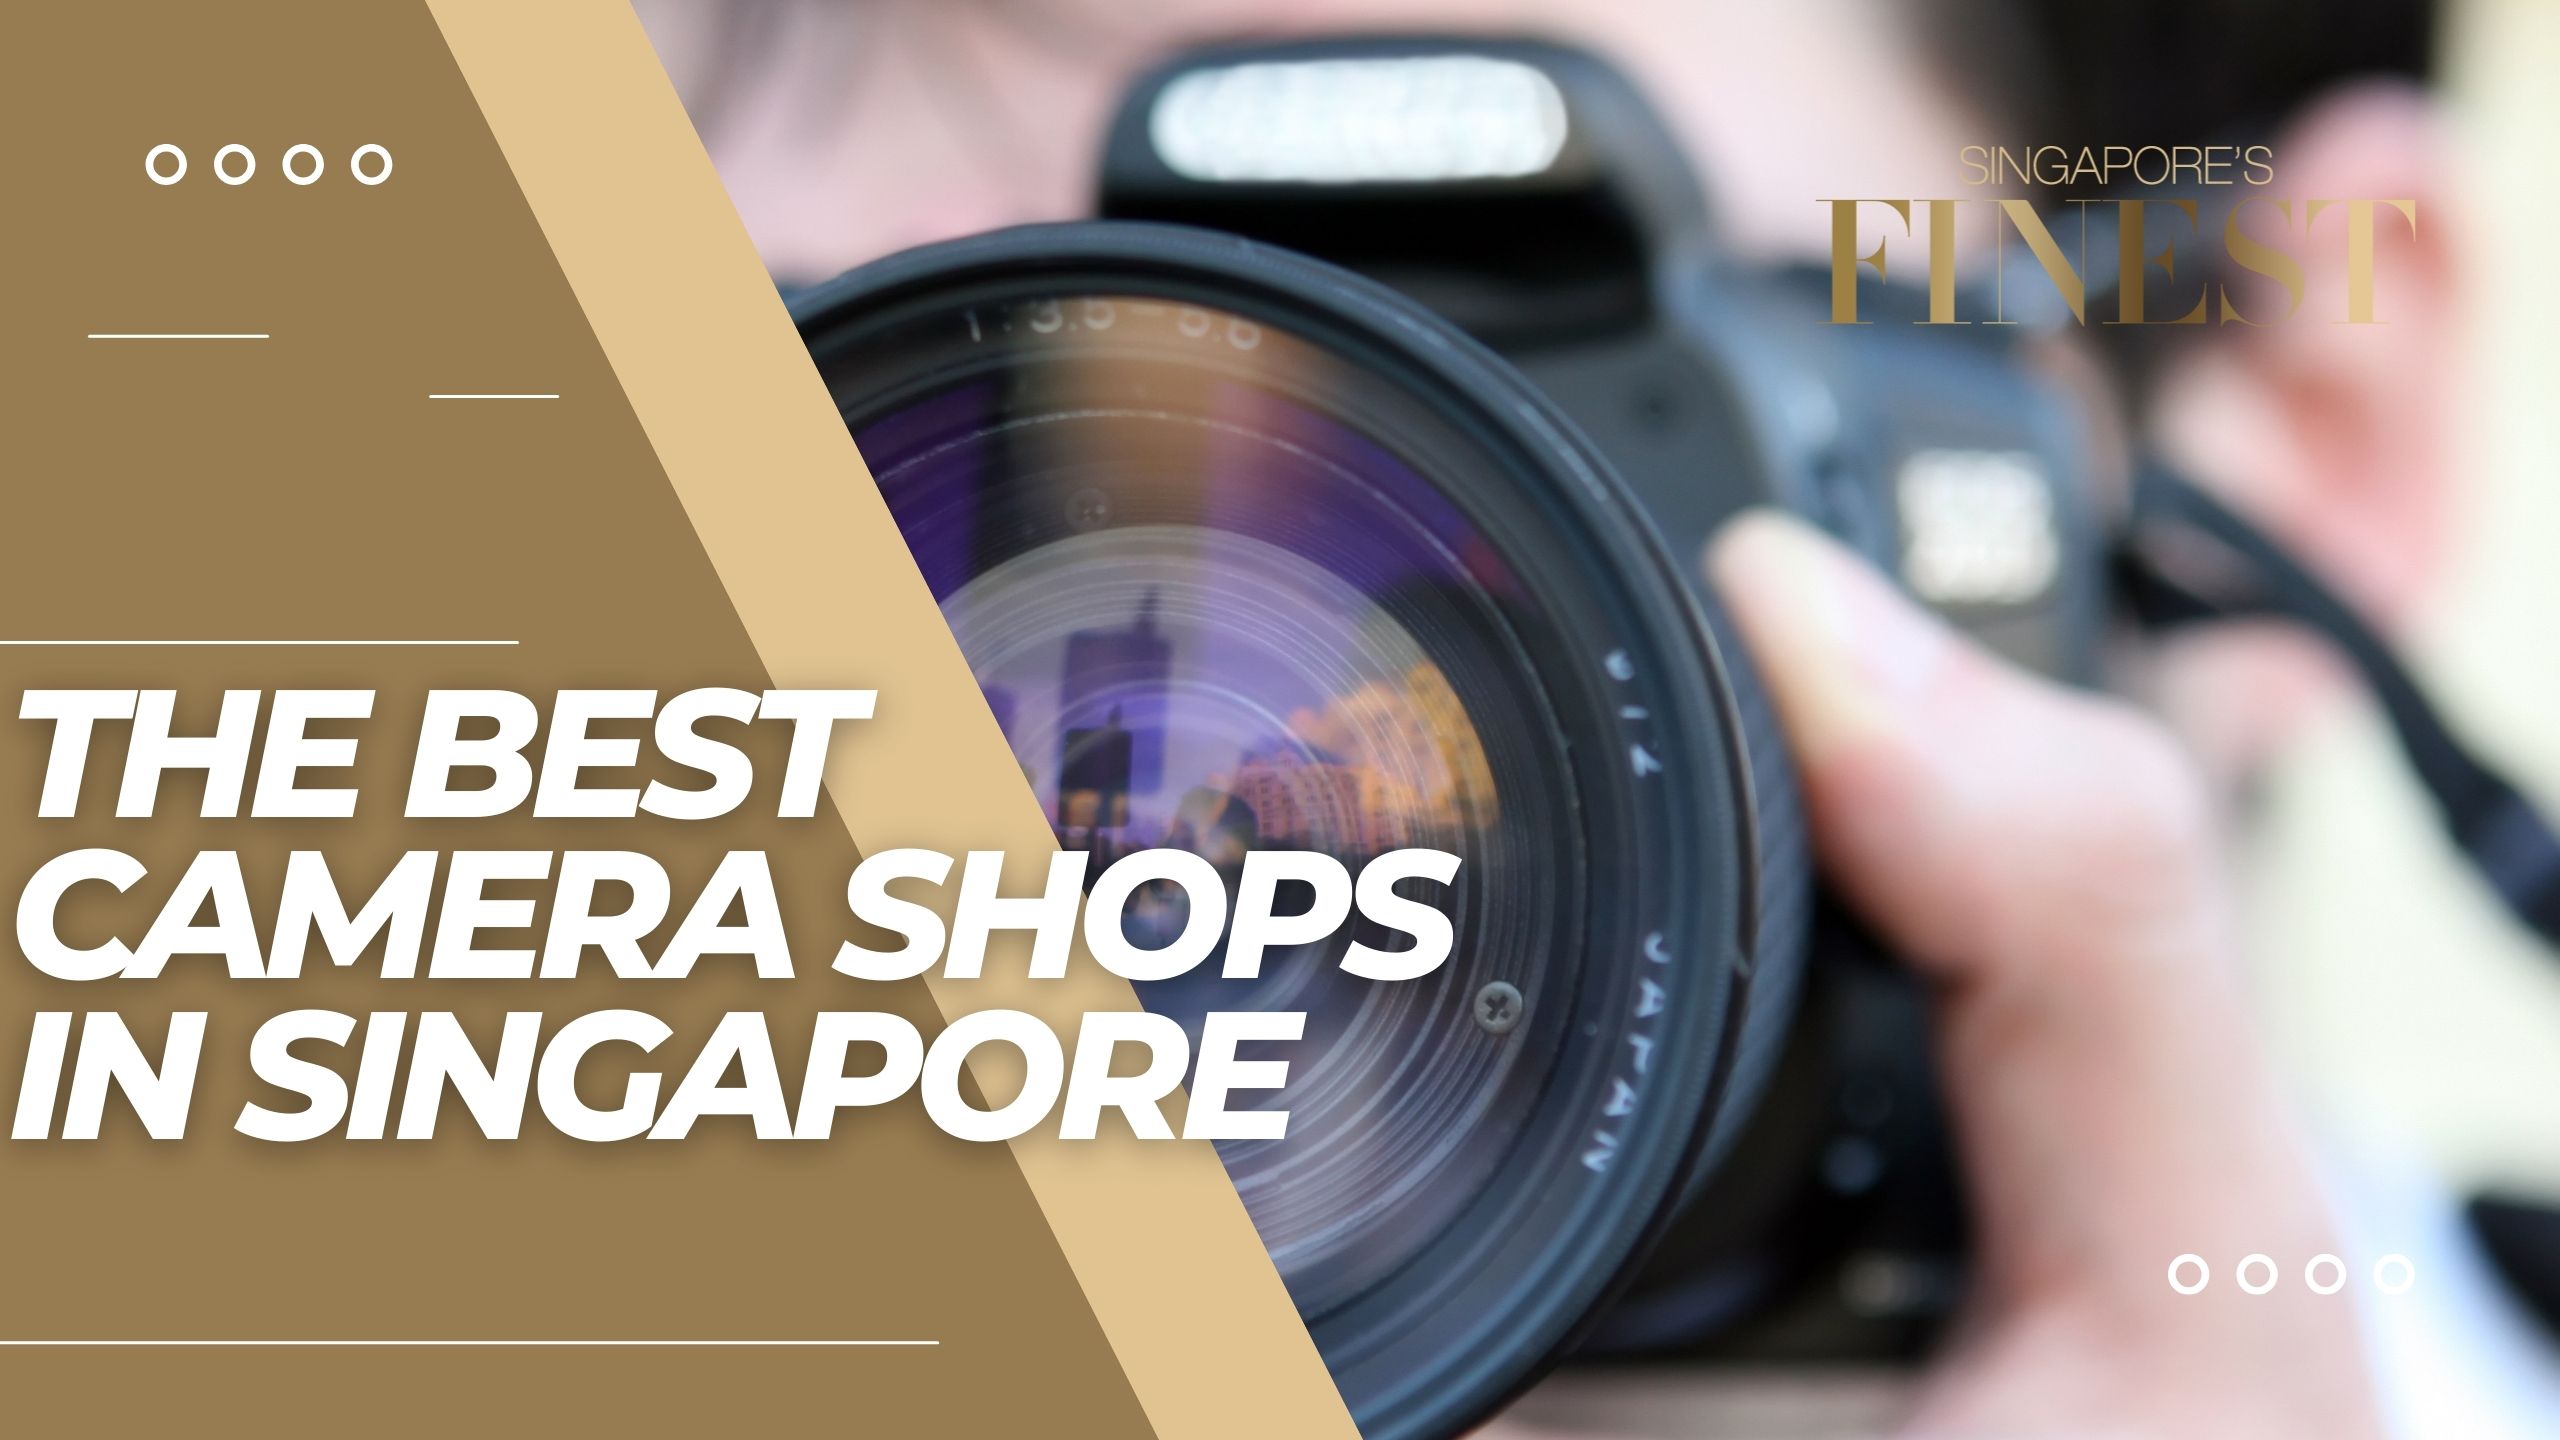 The Finest Camera Shops in Singapore